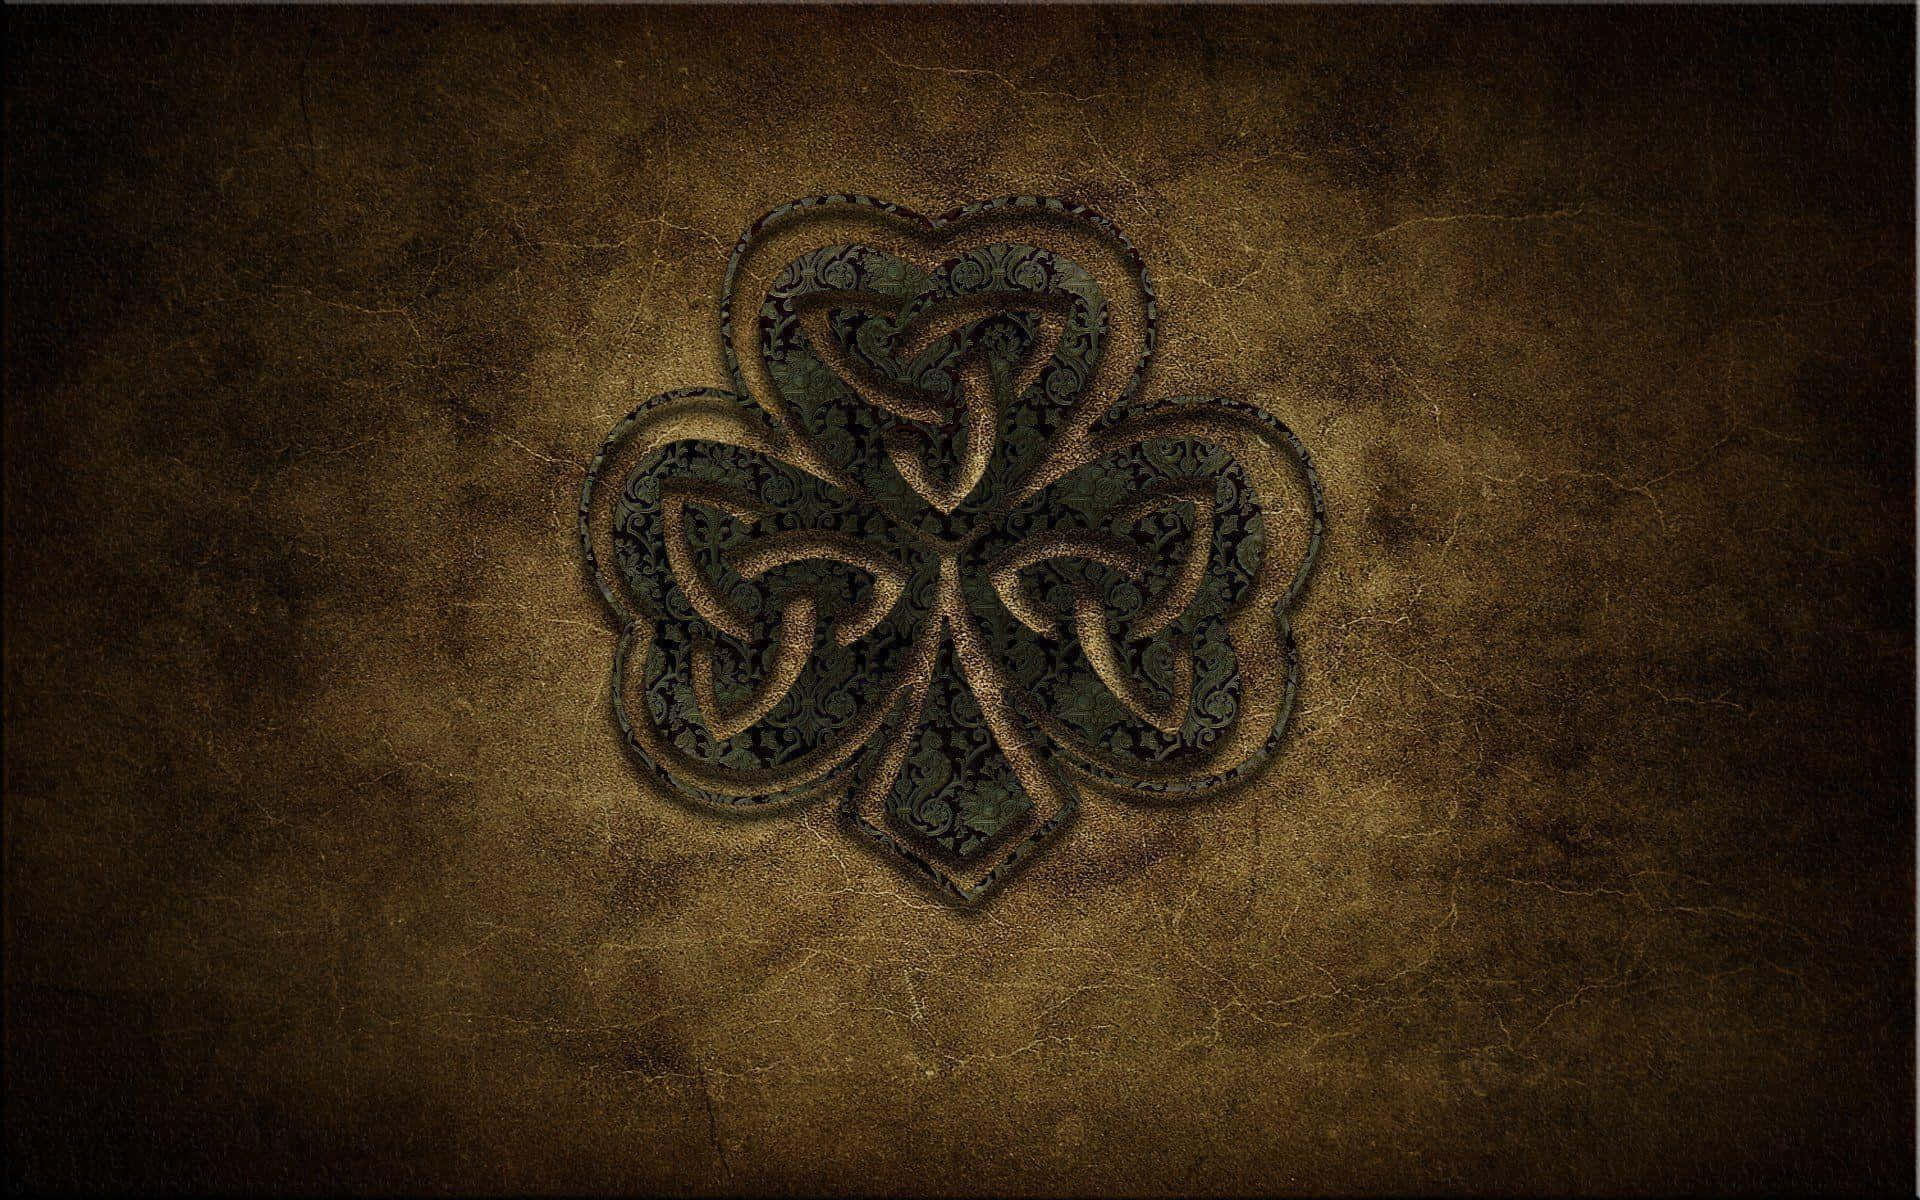 Celebrating Scottish Heritage with an Ancient Celtic Knot